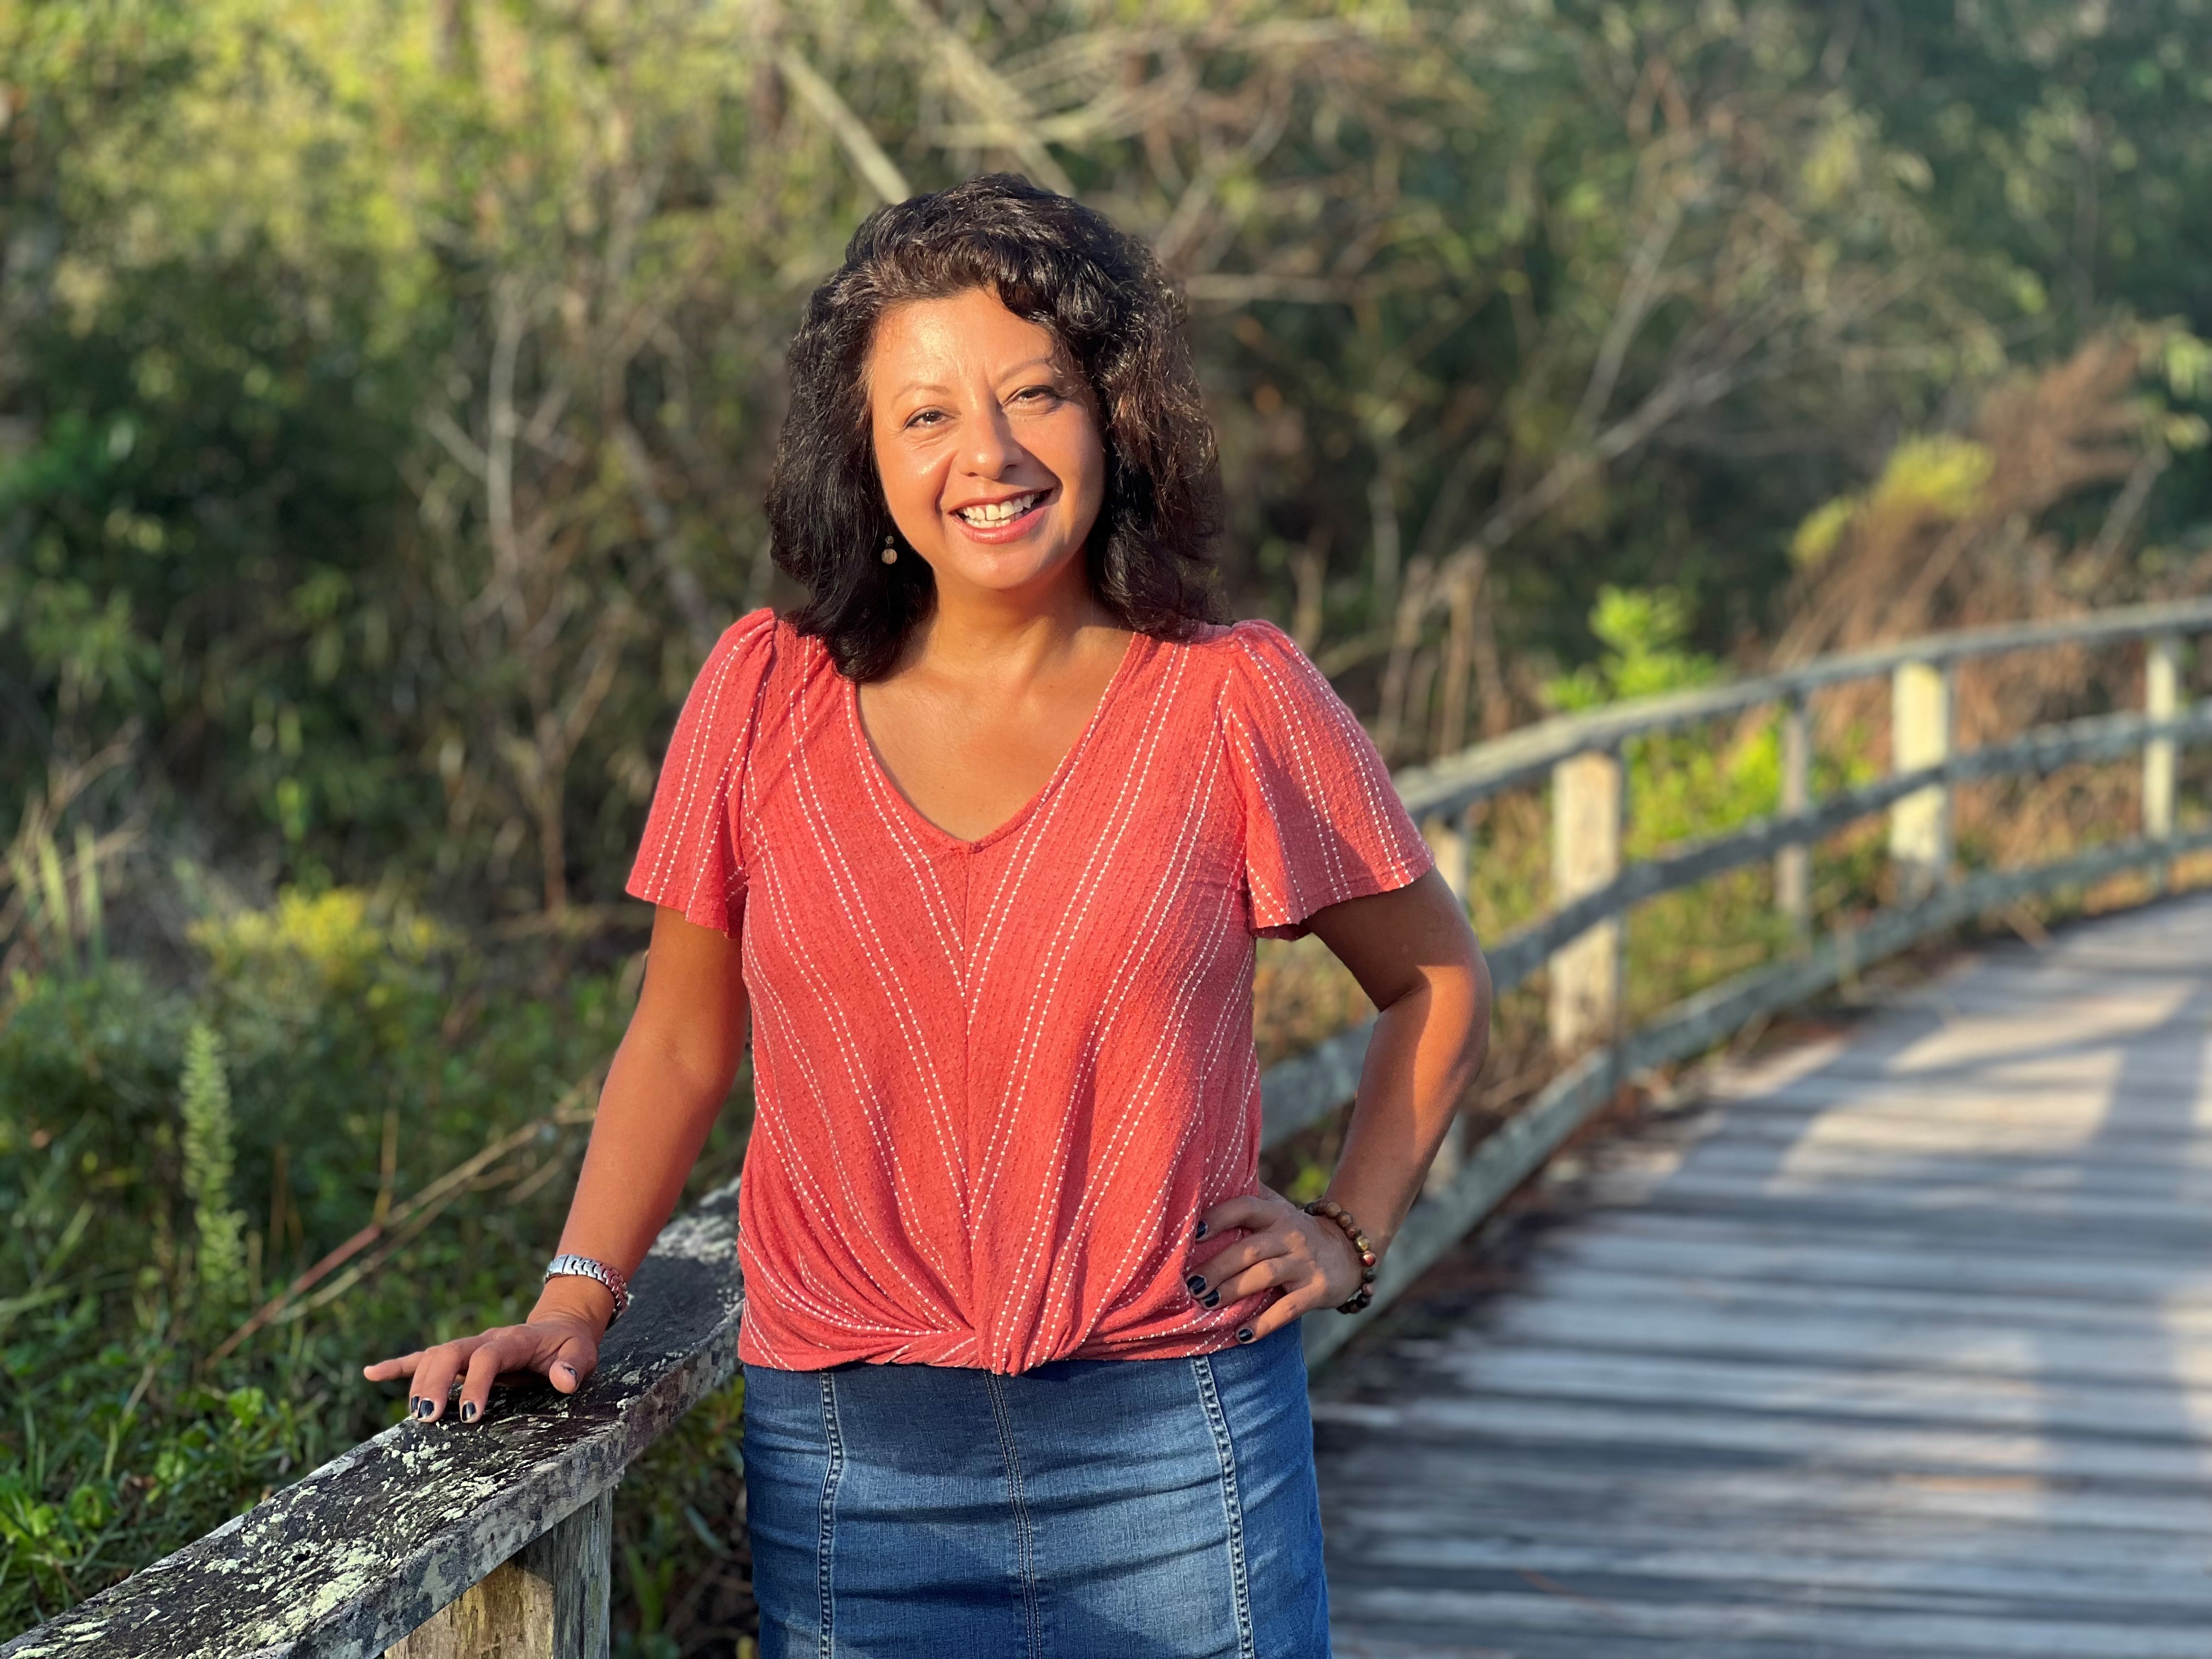 A smiling woman on a boardwalk in the forest